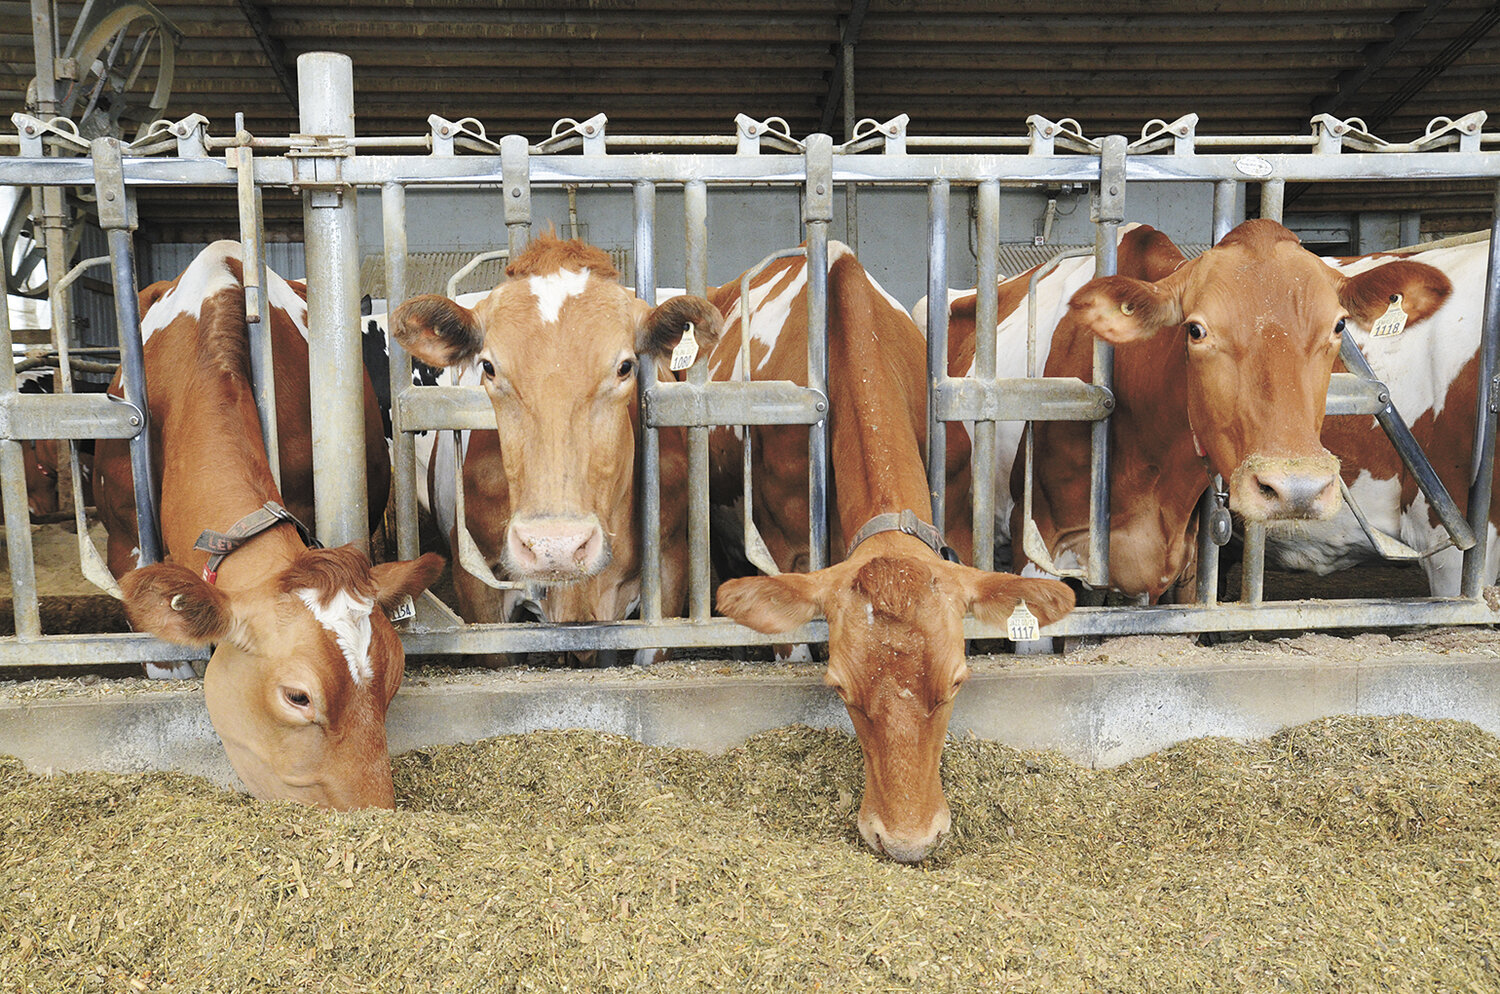 The Guernsey cows served as the inspiration for Royal Guernsey Creamery butter at Gurn-Z Meadow Farm near Columbus, Wisconsin. Milk made on the farm on Monday and Tuesday is picked up and churned into butter within 48 hours.